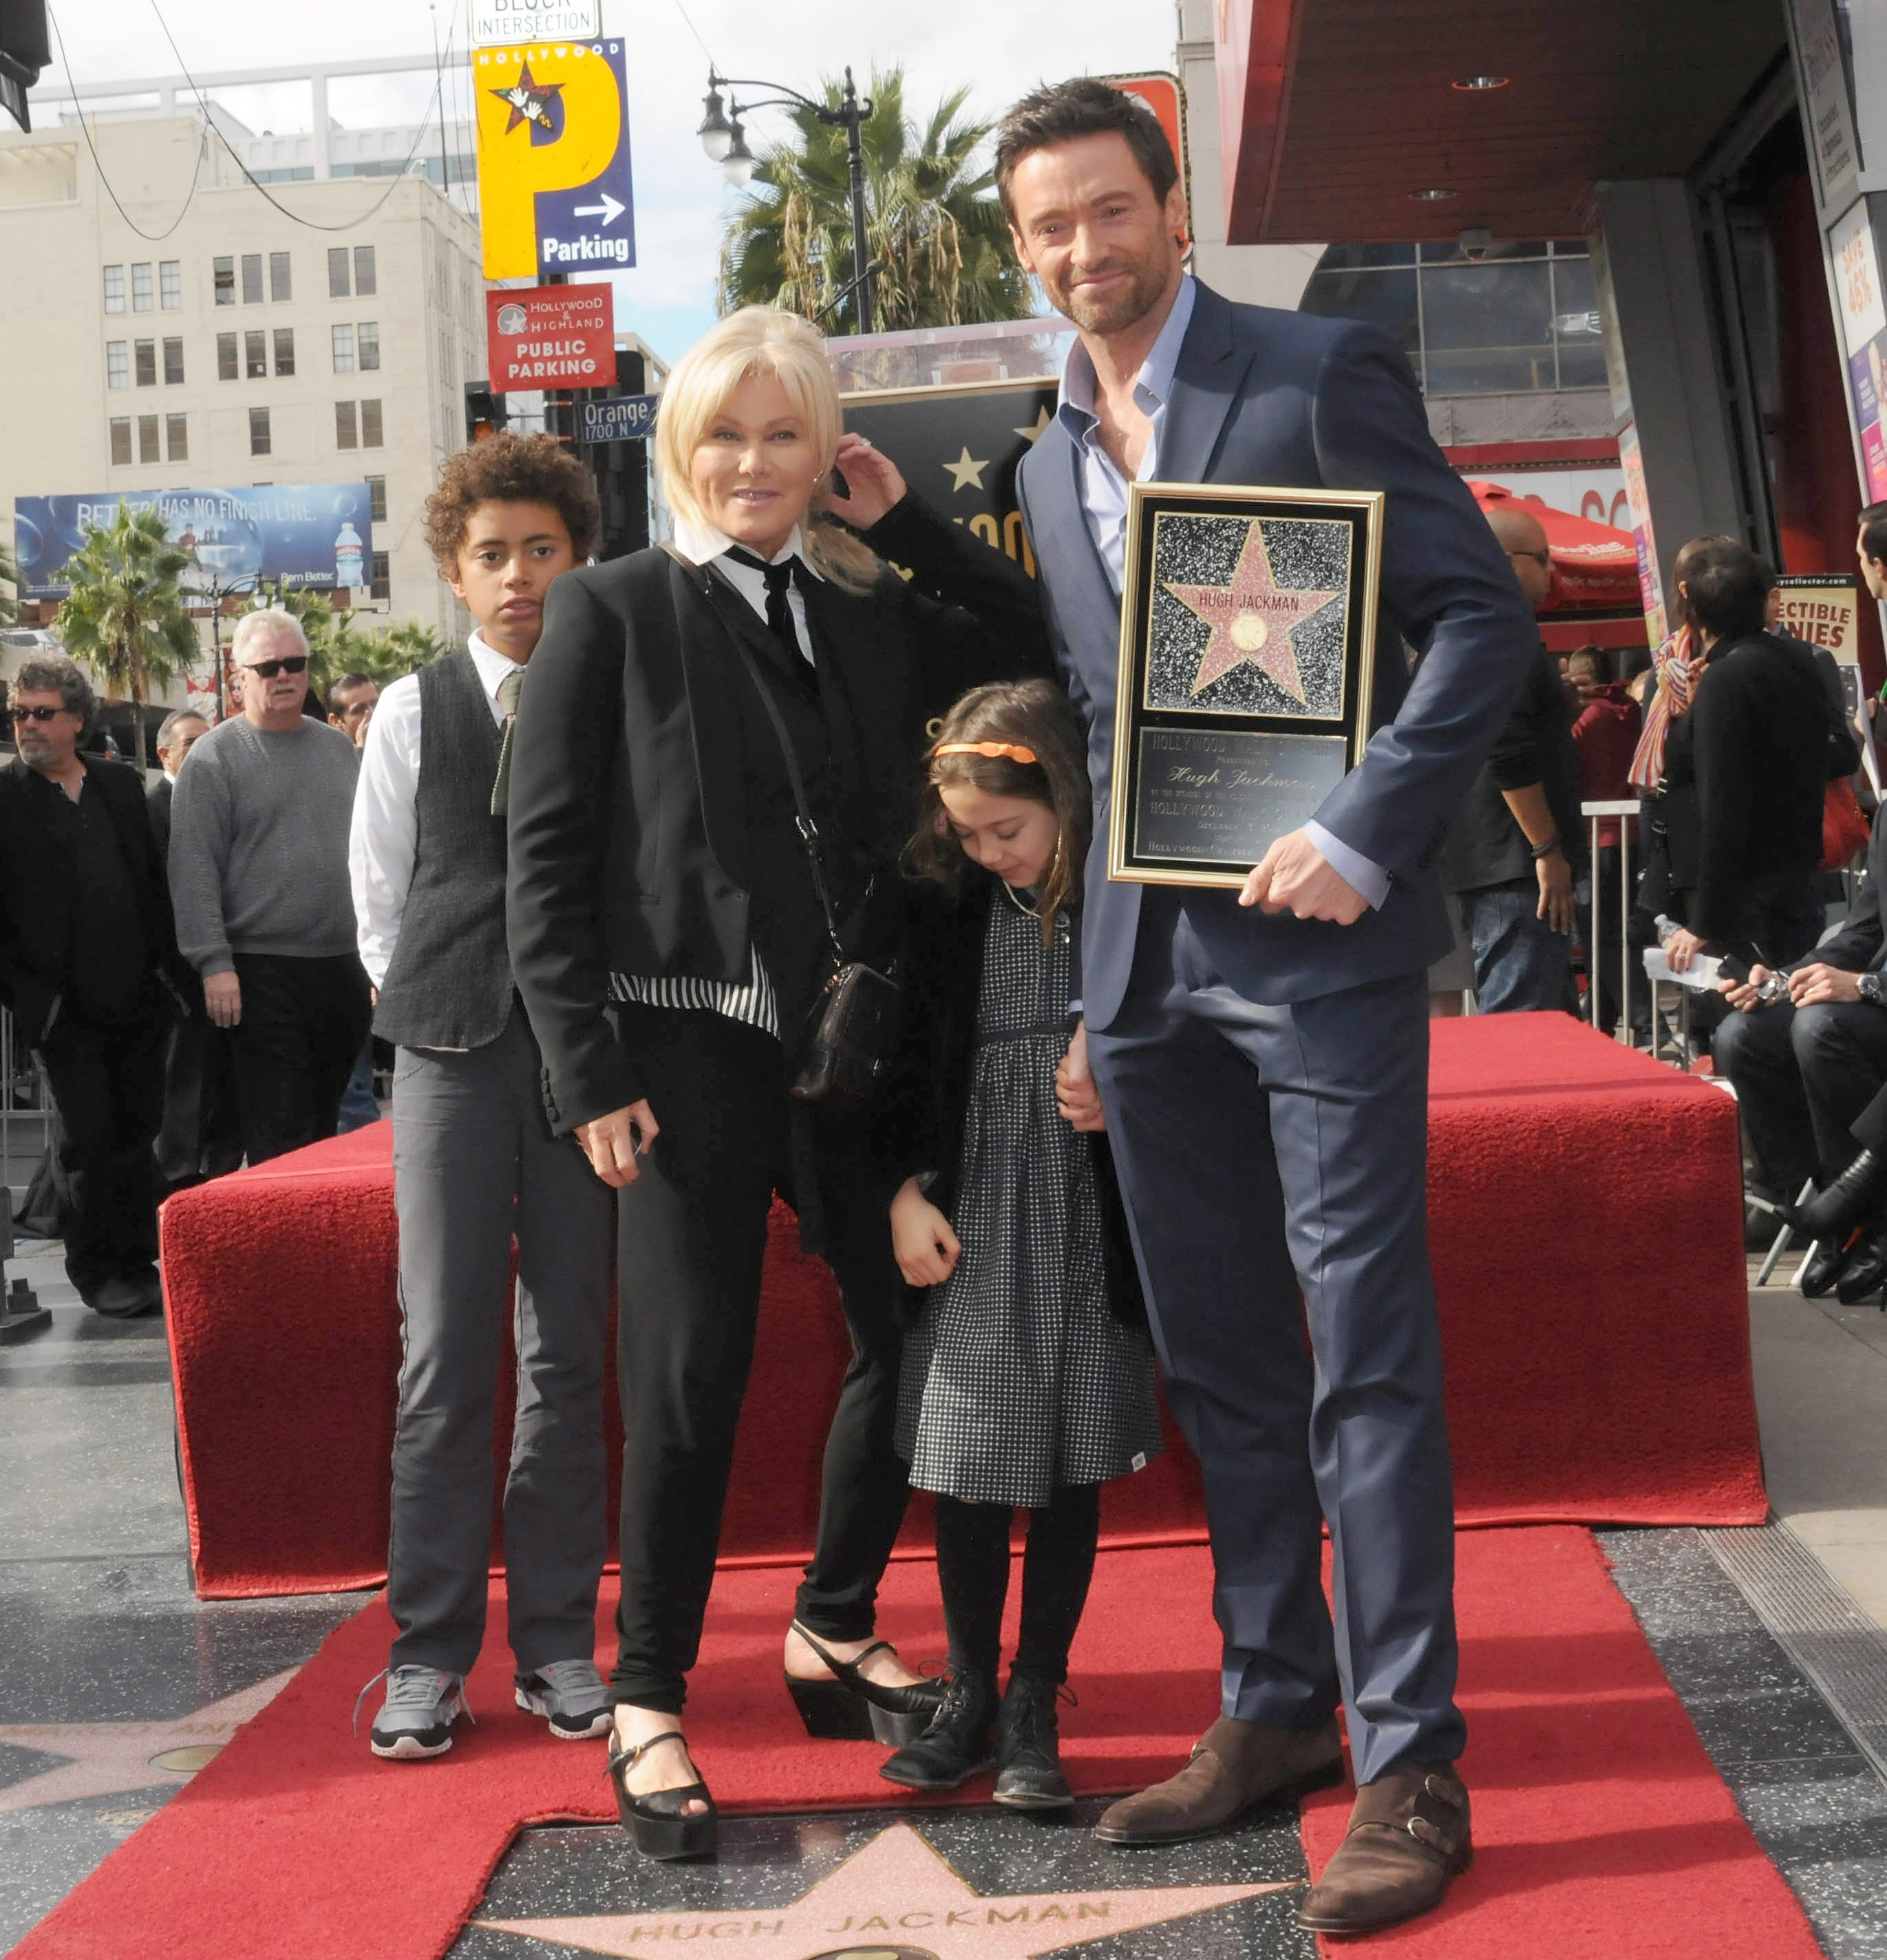 Oscar Maximilian and Ava Eliot Jackman, Deborra-Lee Furness and Hugh Jackman at Hugh's Star Ceremony in Hollywood, 2012 | Source: Getty Images